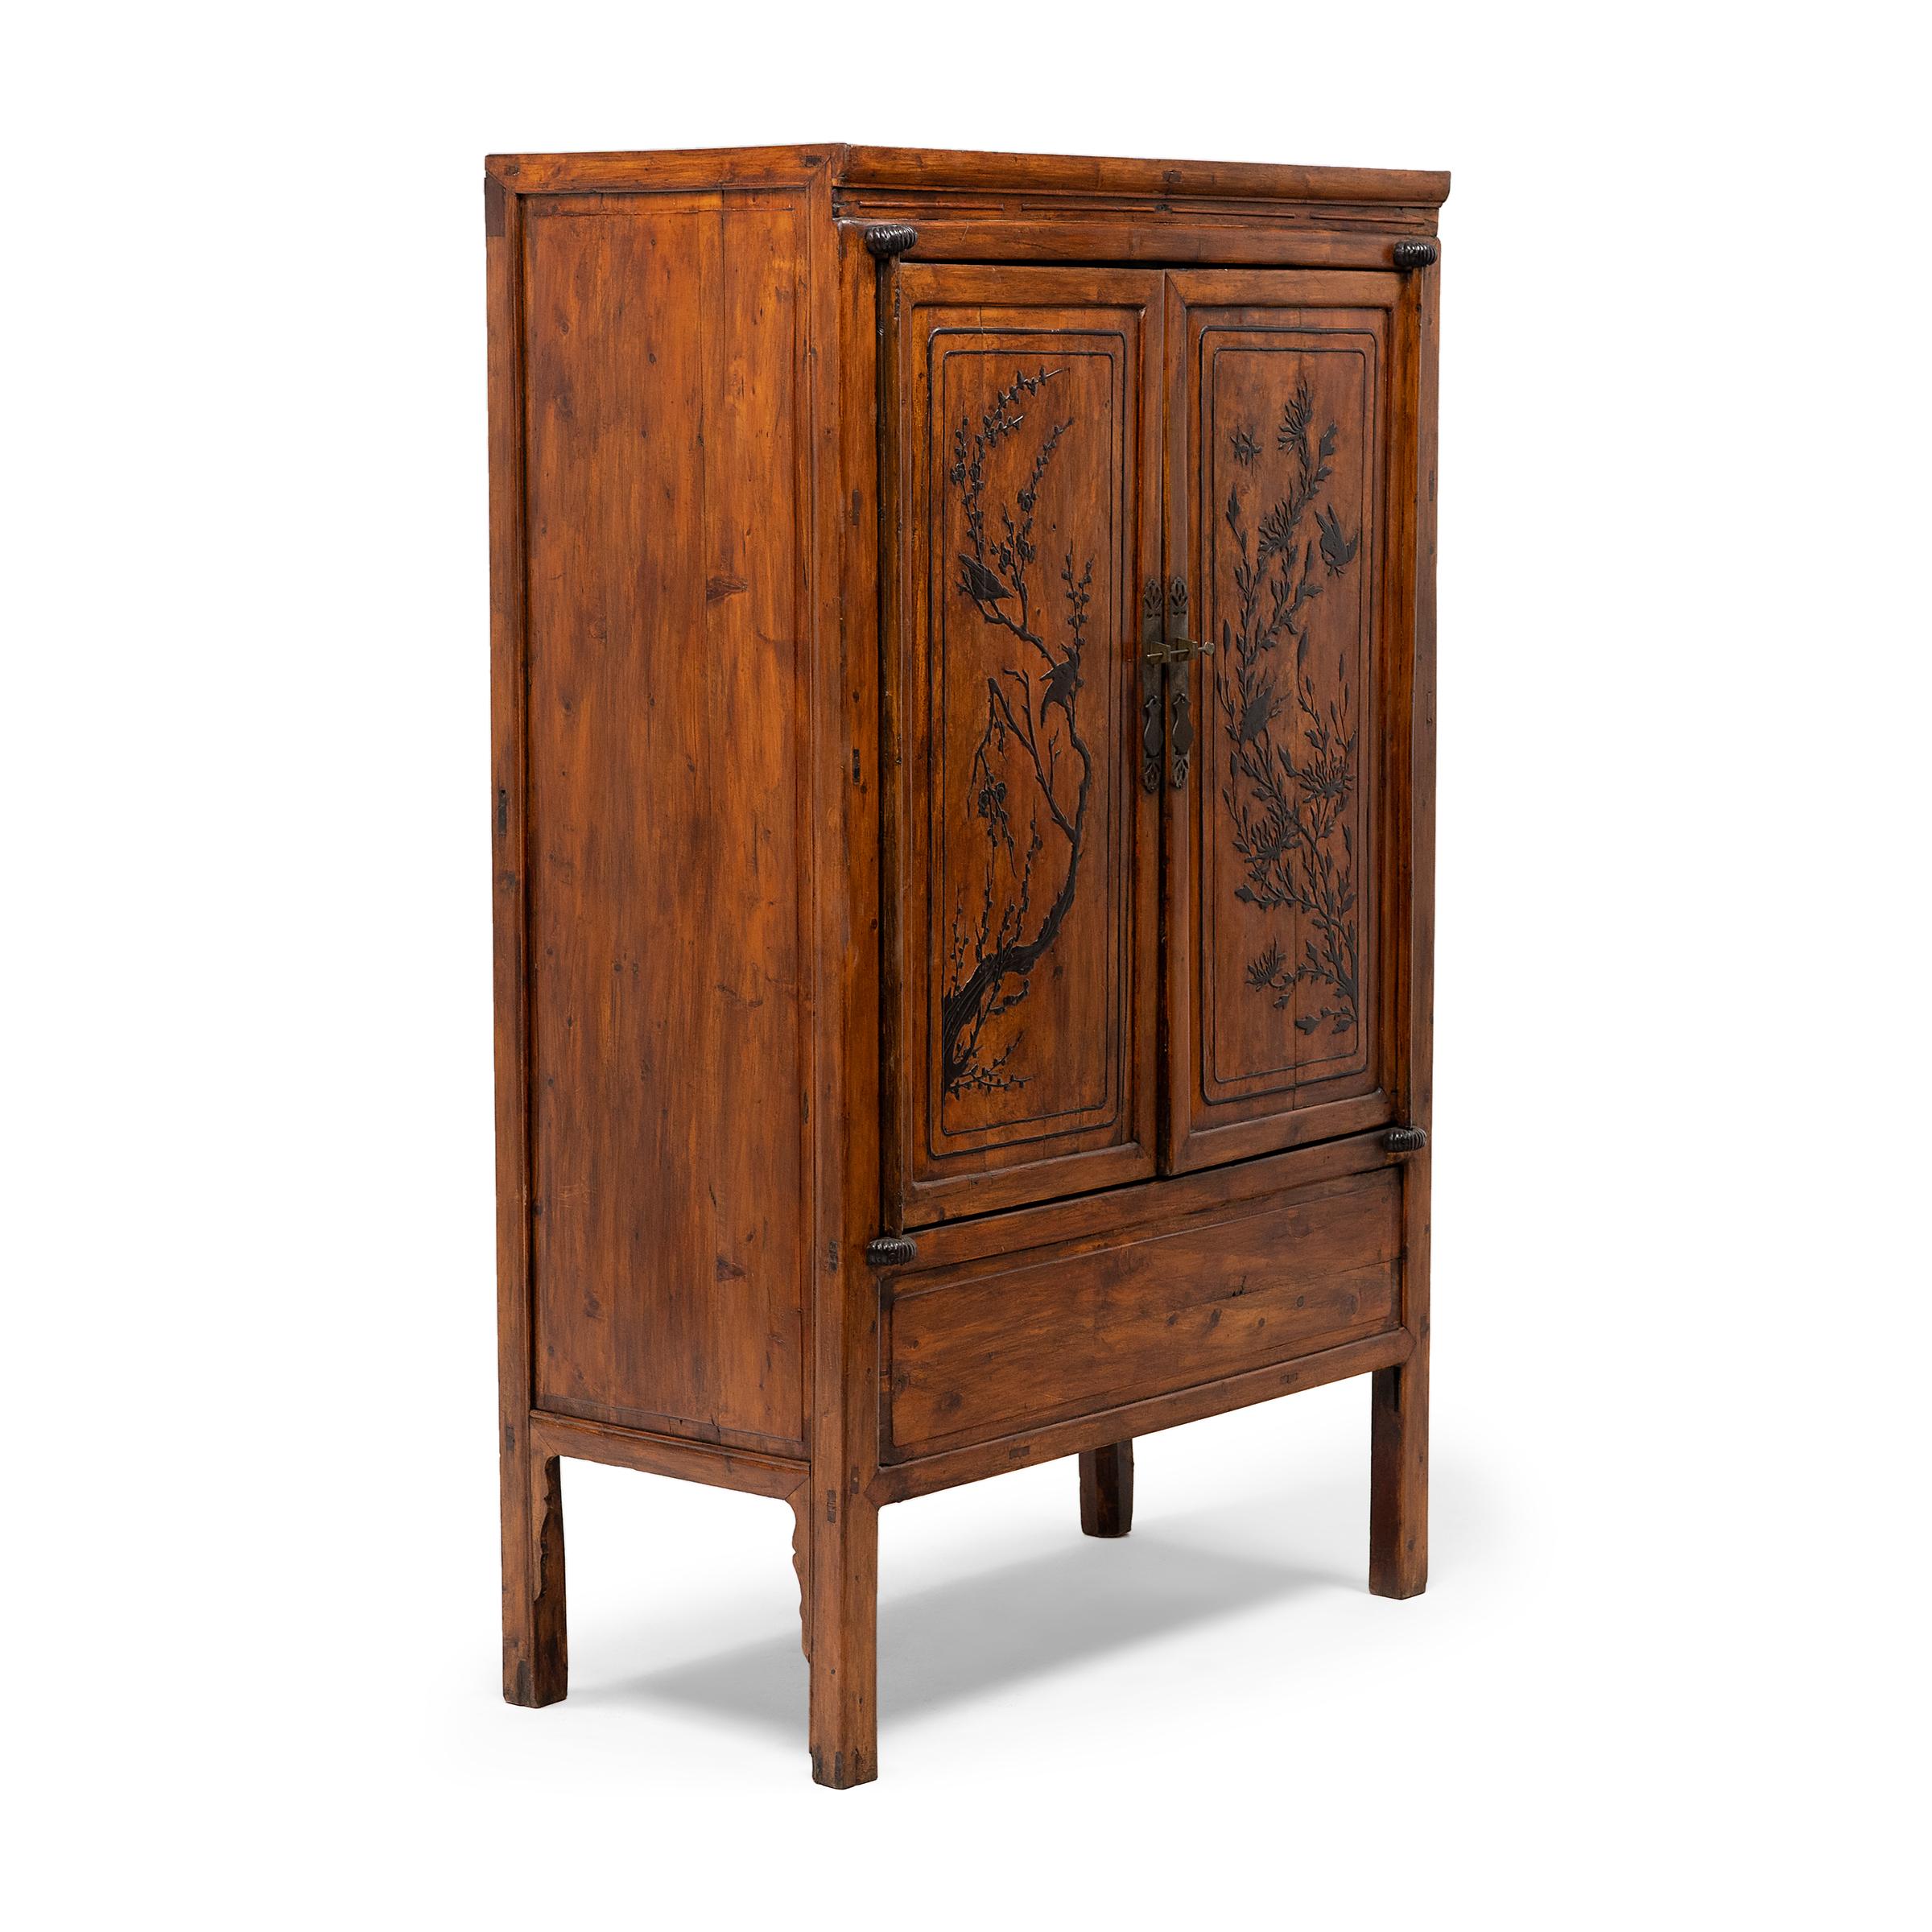 This tall square-corner cabinet from the early 20th century has a simple silhouette and charming low-relief decoration of a traditional bird-and-flower design. Crafted of fir with mortise-and-tenon joinery, the cabinet has a clean-lined form